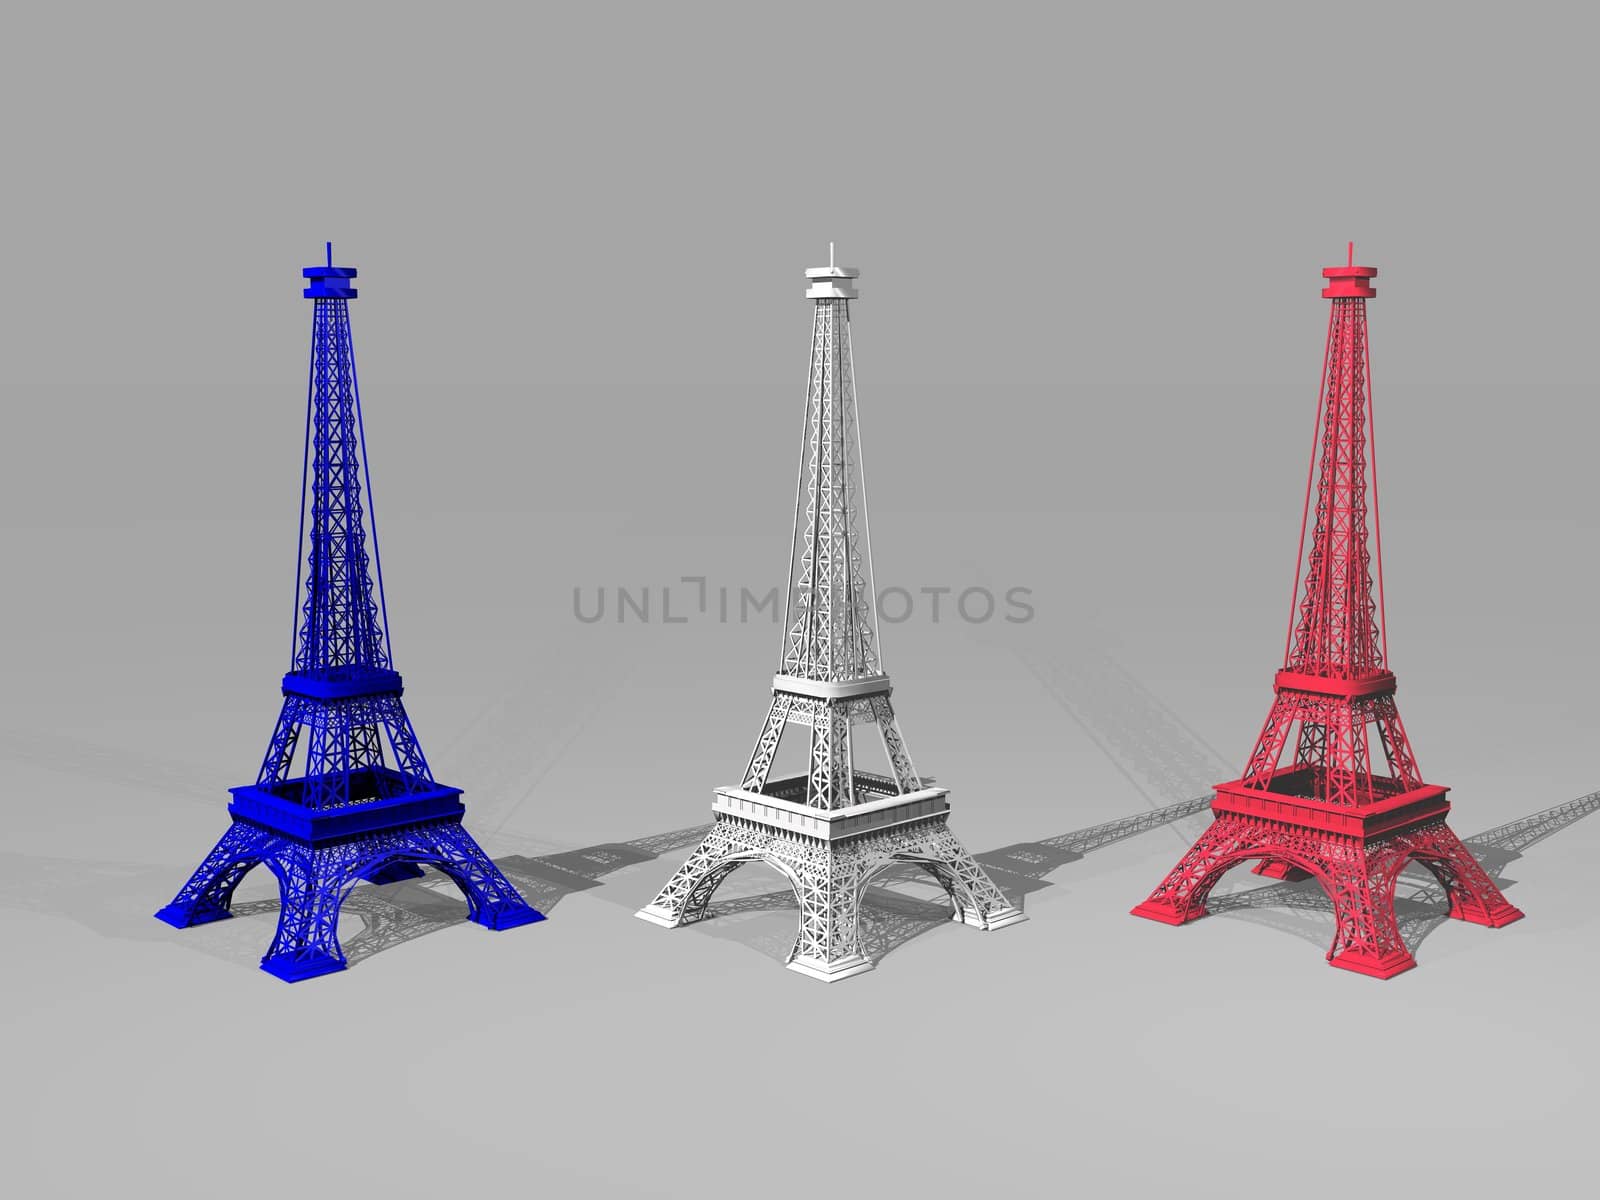 French flag colors on three Eiffel towers - 3D render by Elenaphotos21